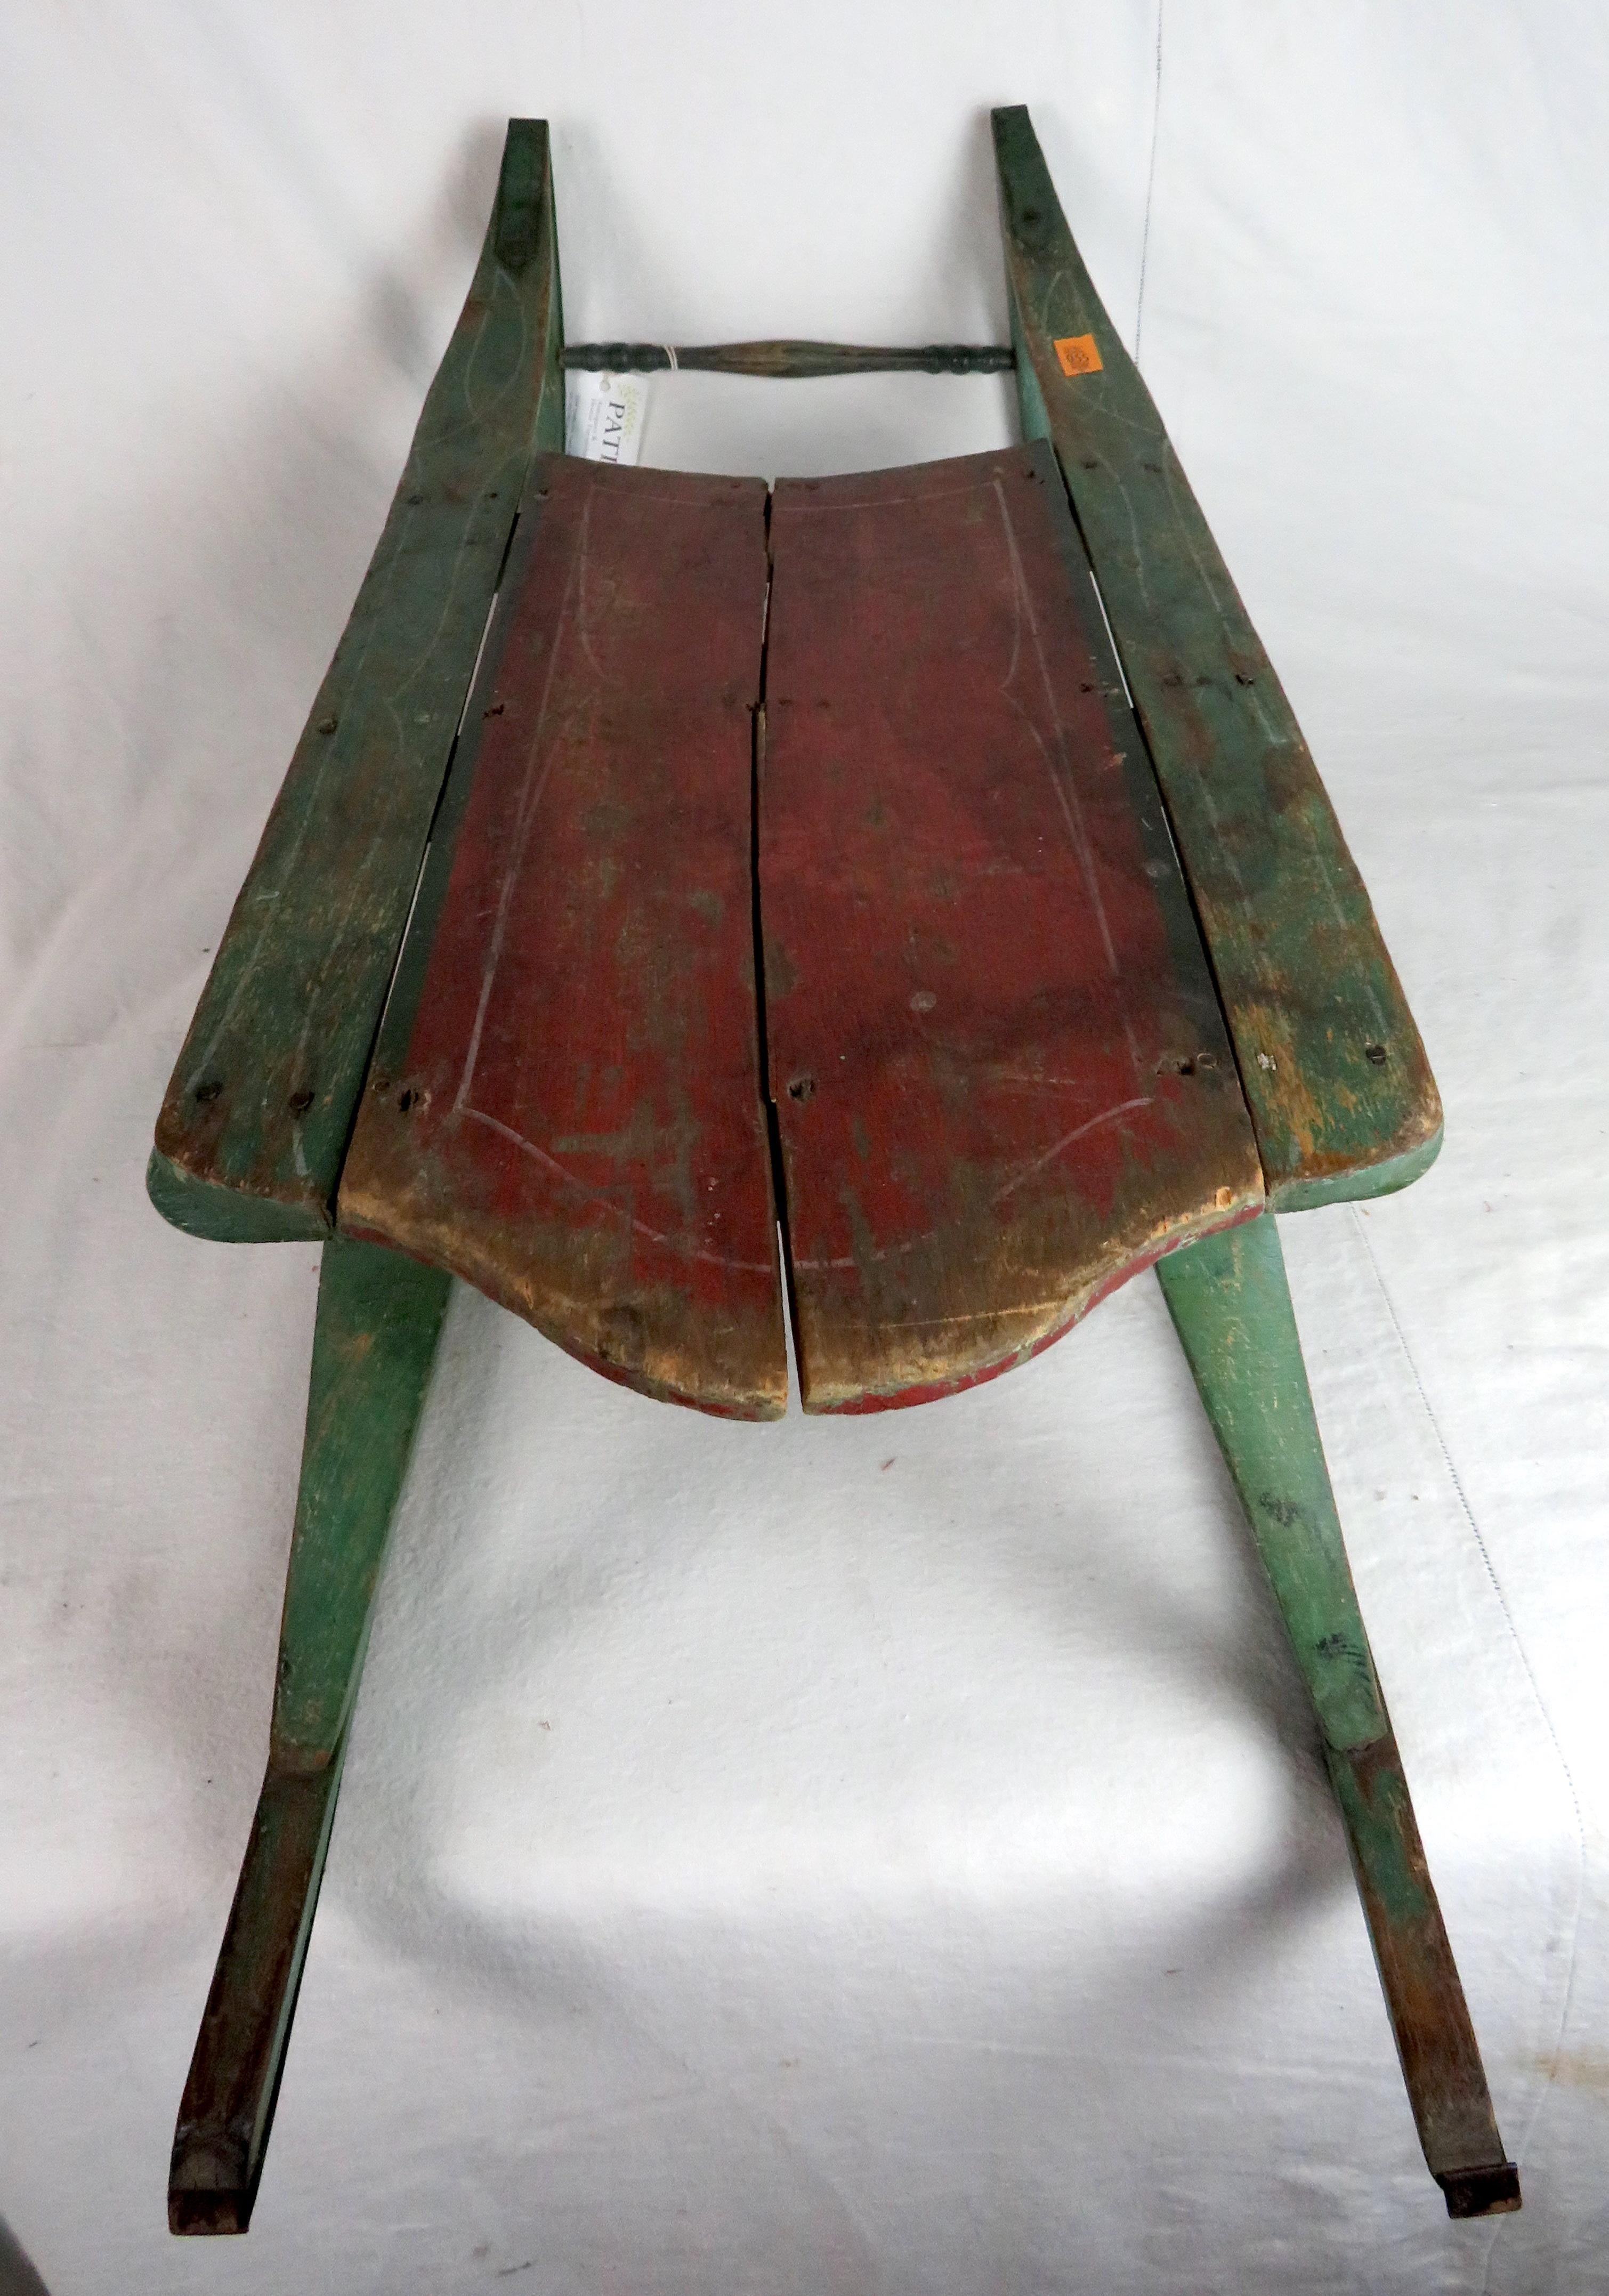 Antique Child's snow sled with green painted body and red seat.